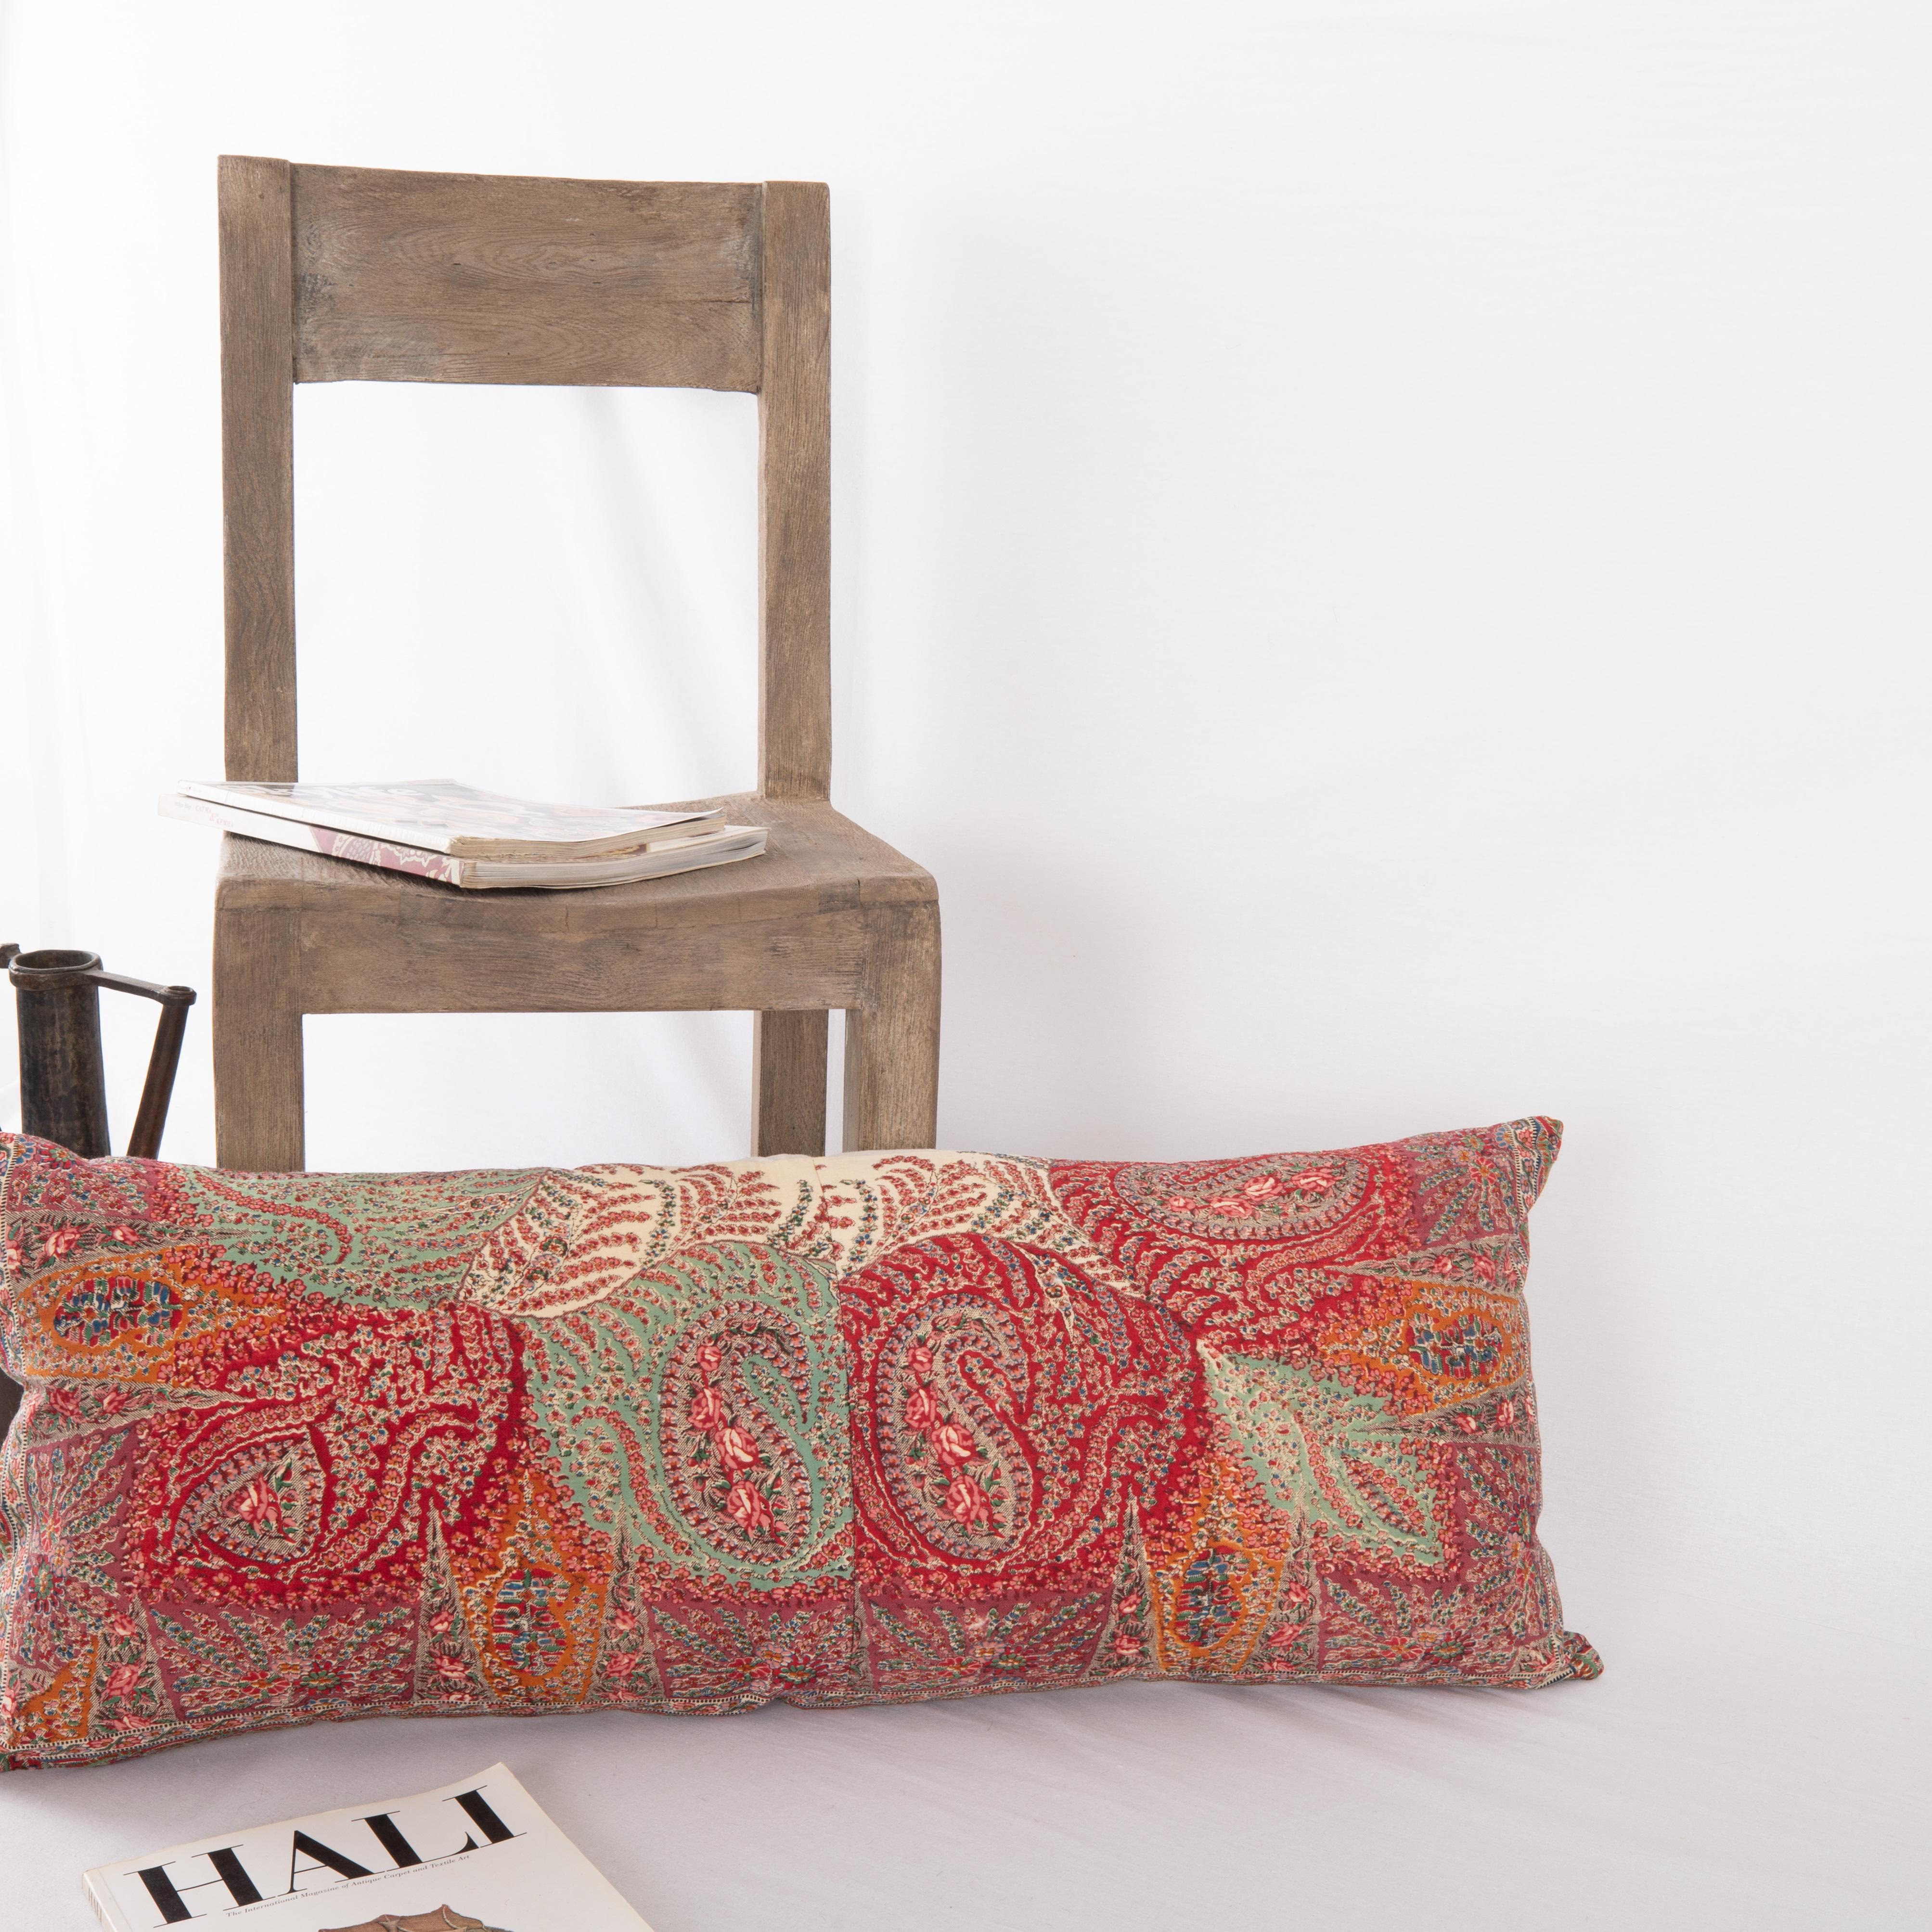 19th Century Pillow Cover Made from an English Printed Shawl, 19th C. For Sale